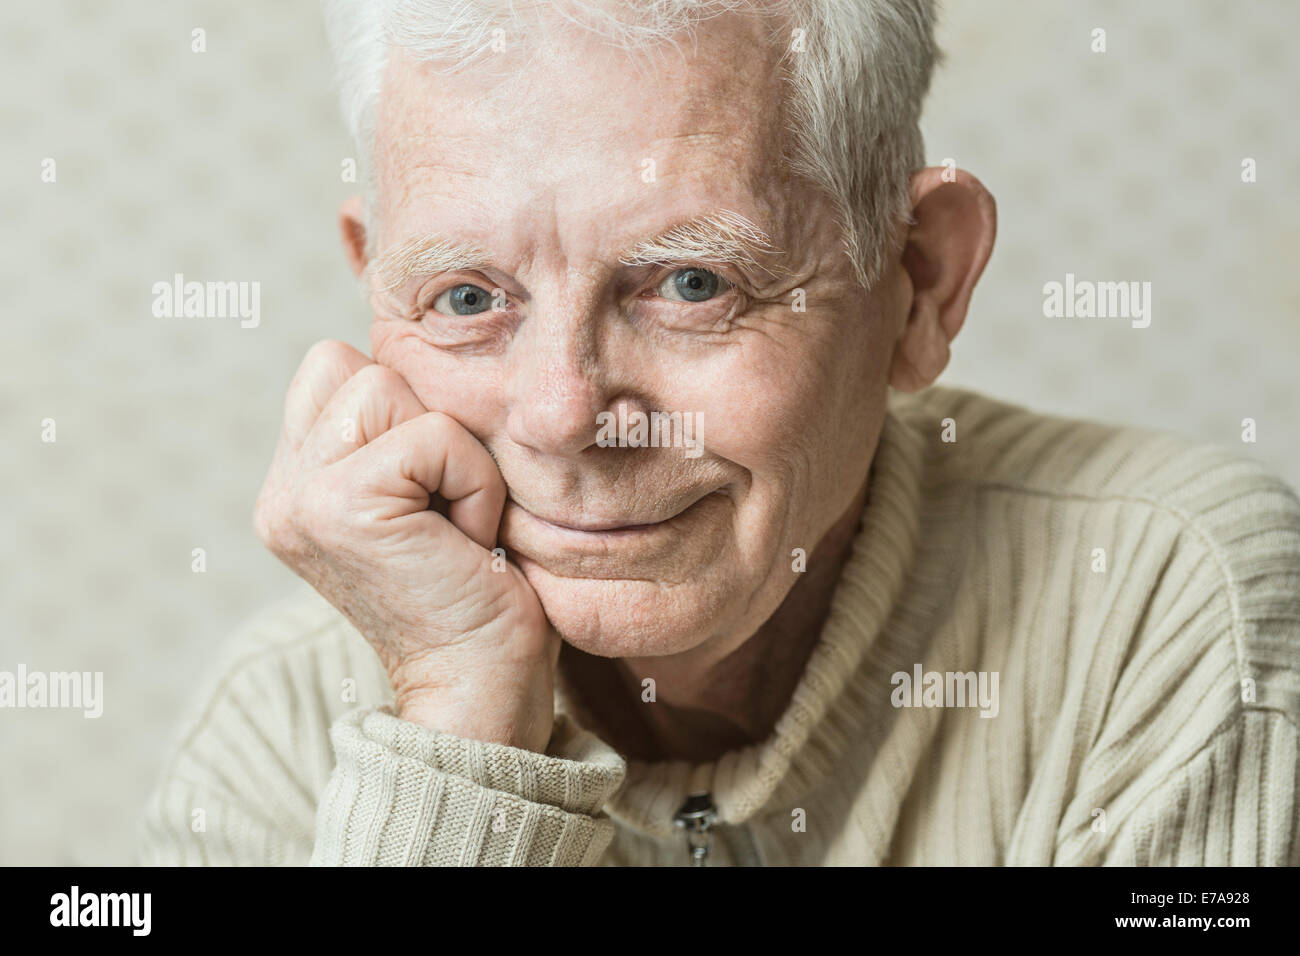 Close-up portrait of smiling senior man with hand on chin Stock Photo